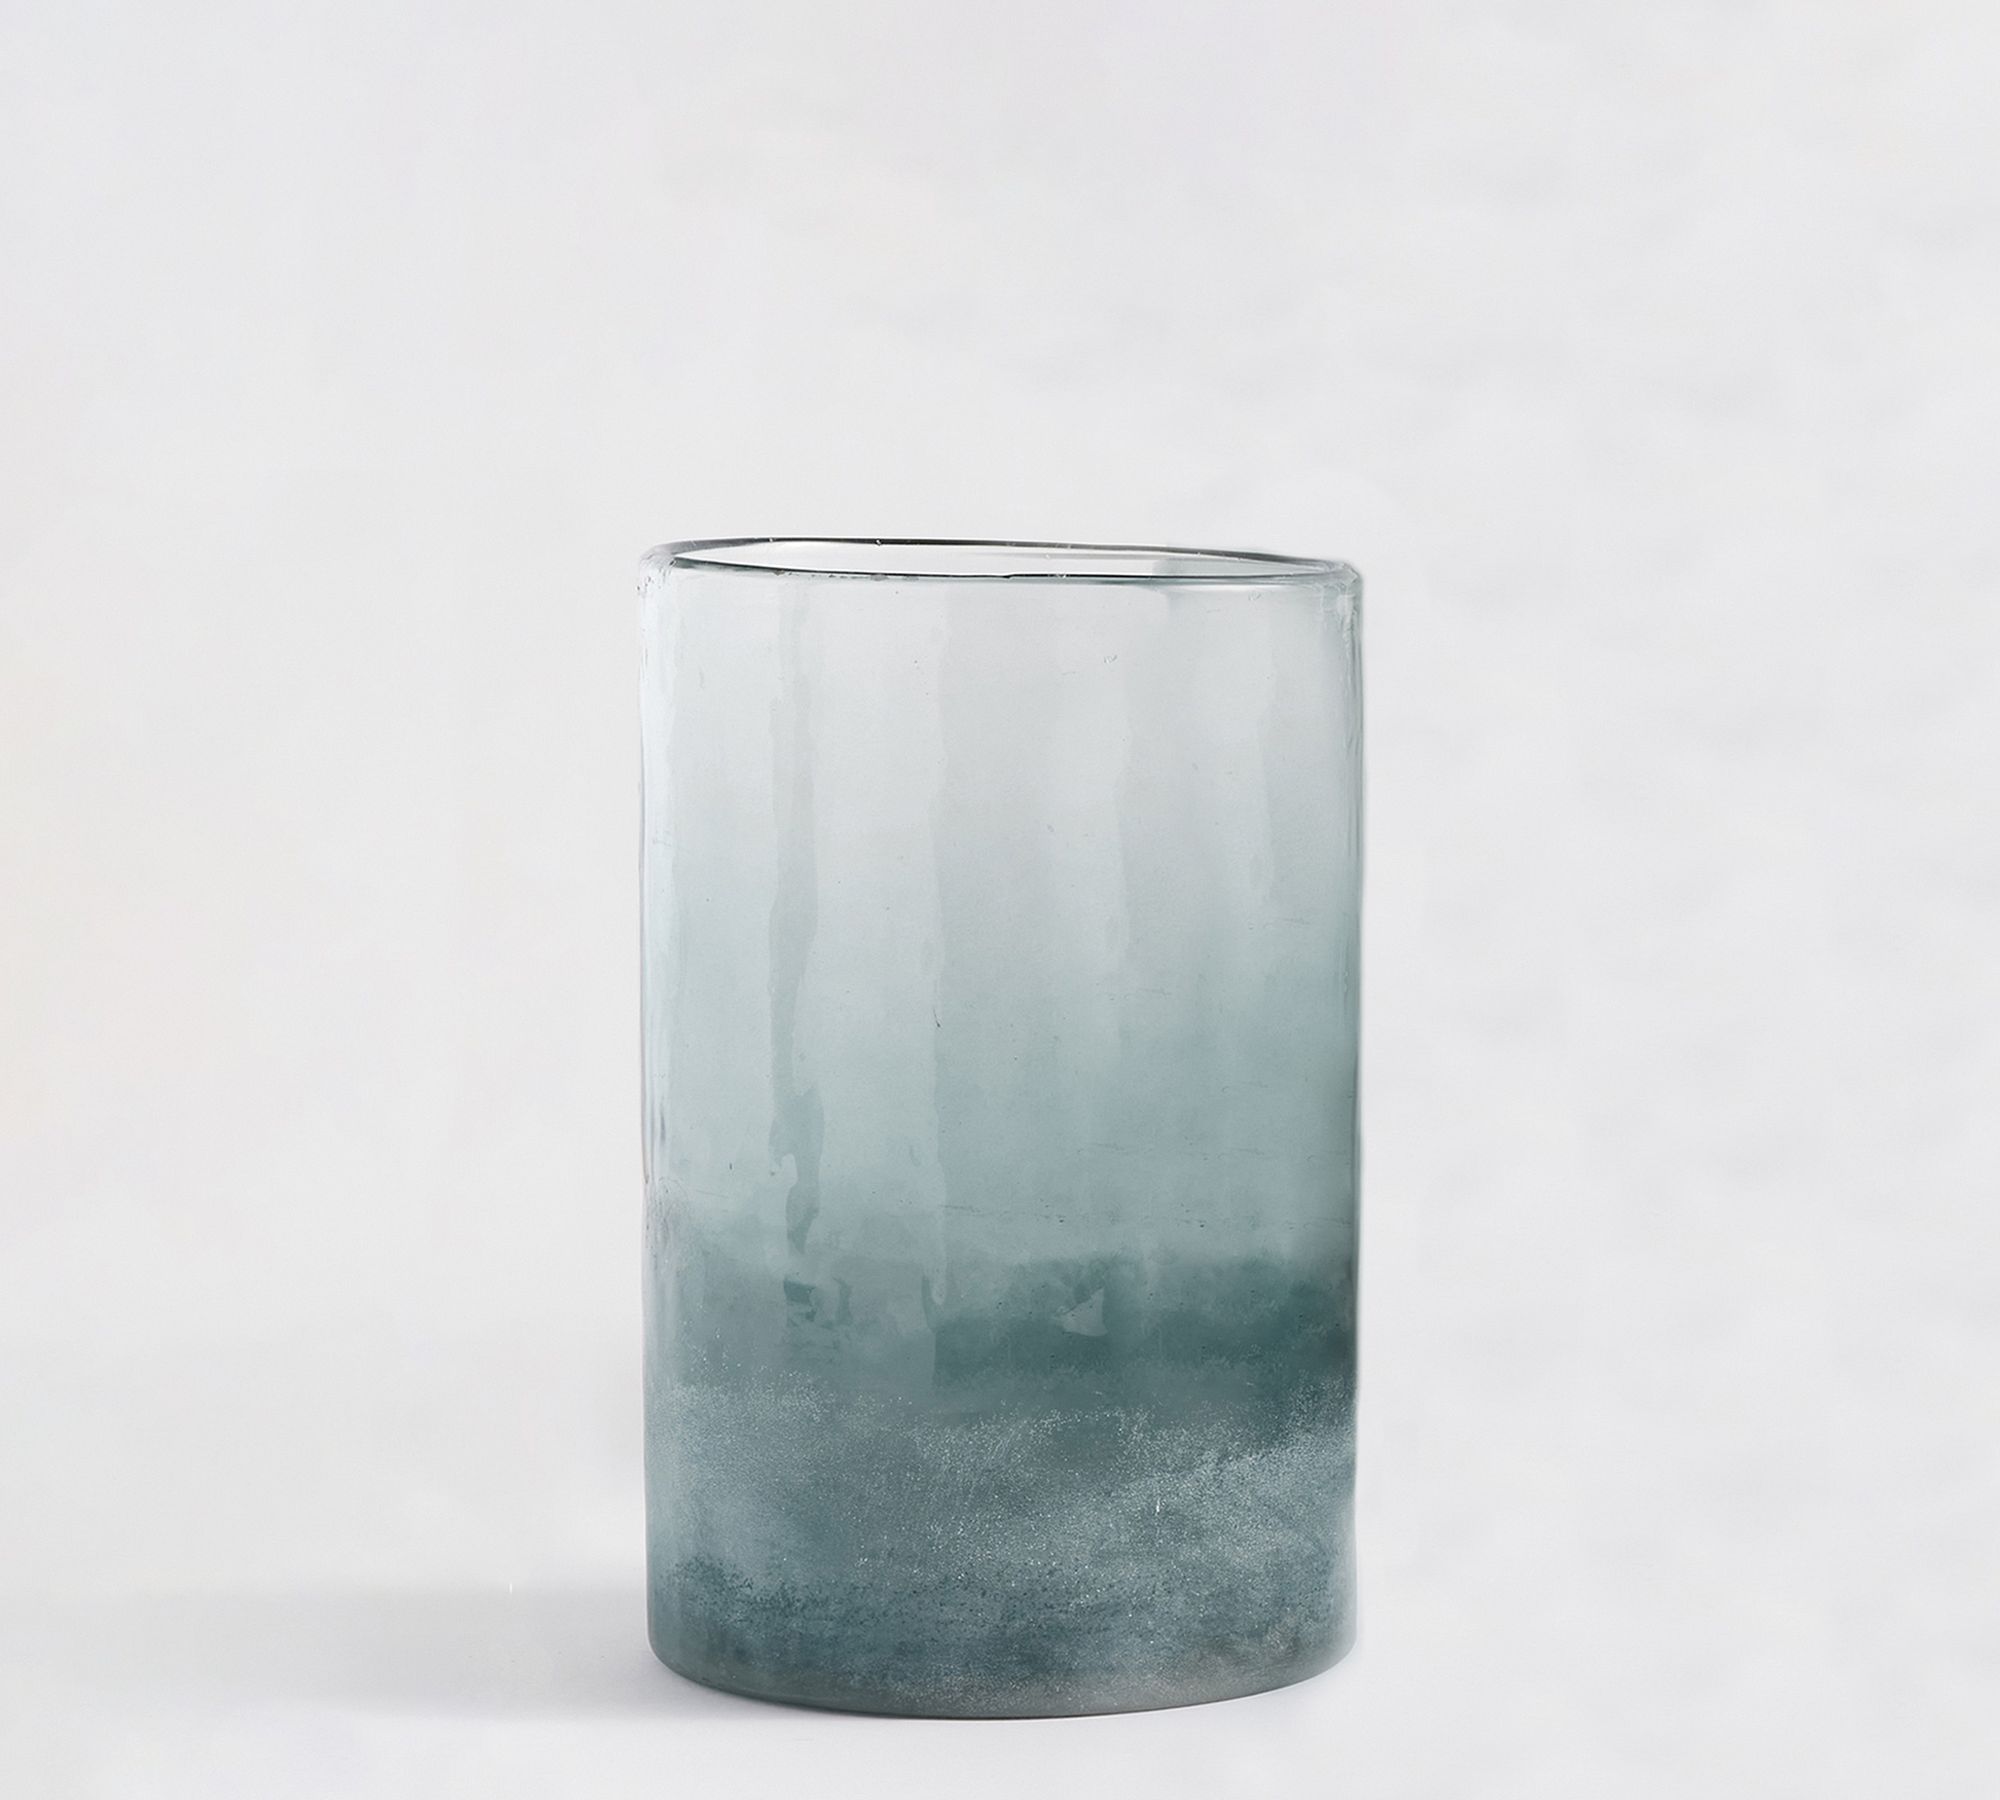 Montauk Frosted Handcrafted Glass Candleholder